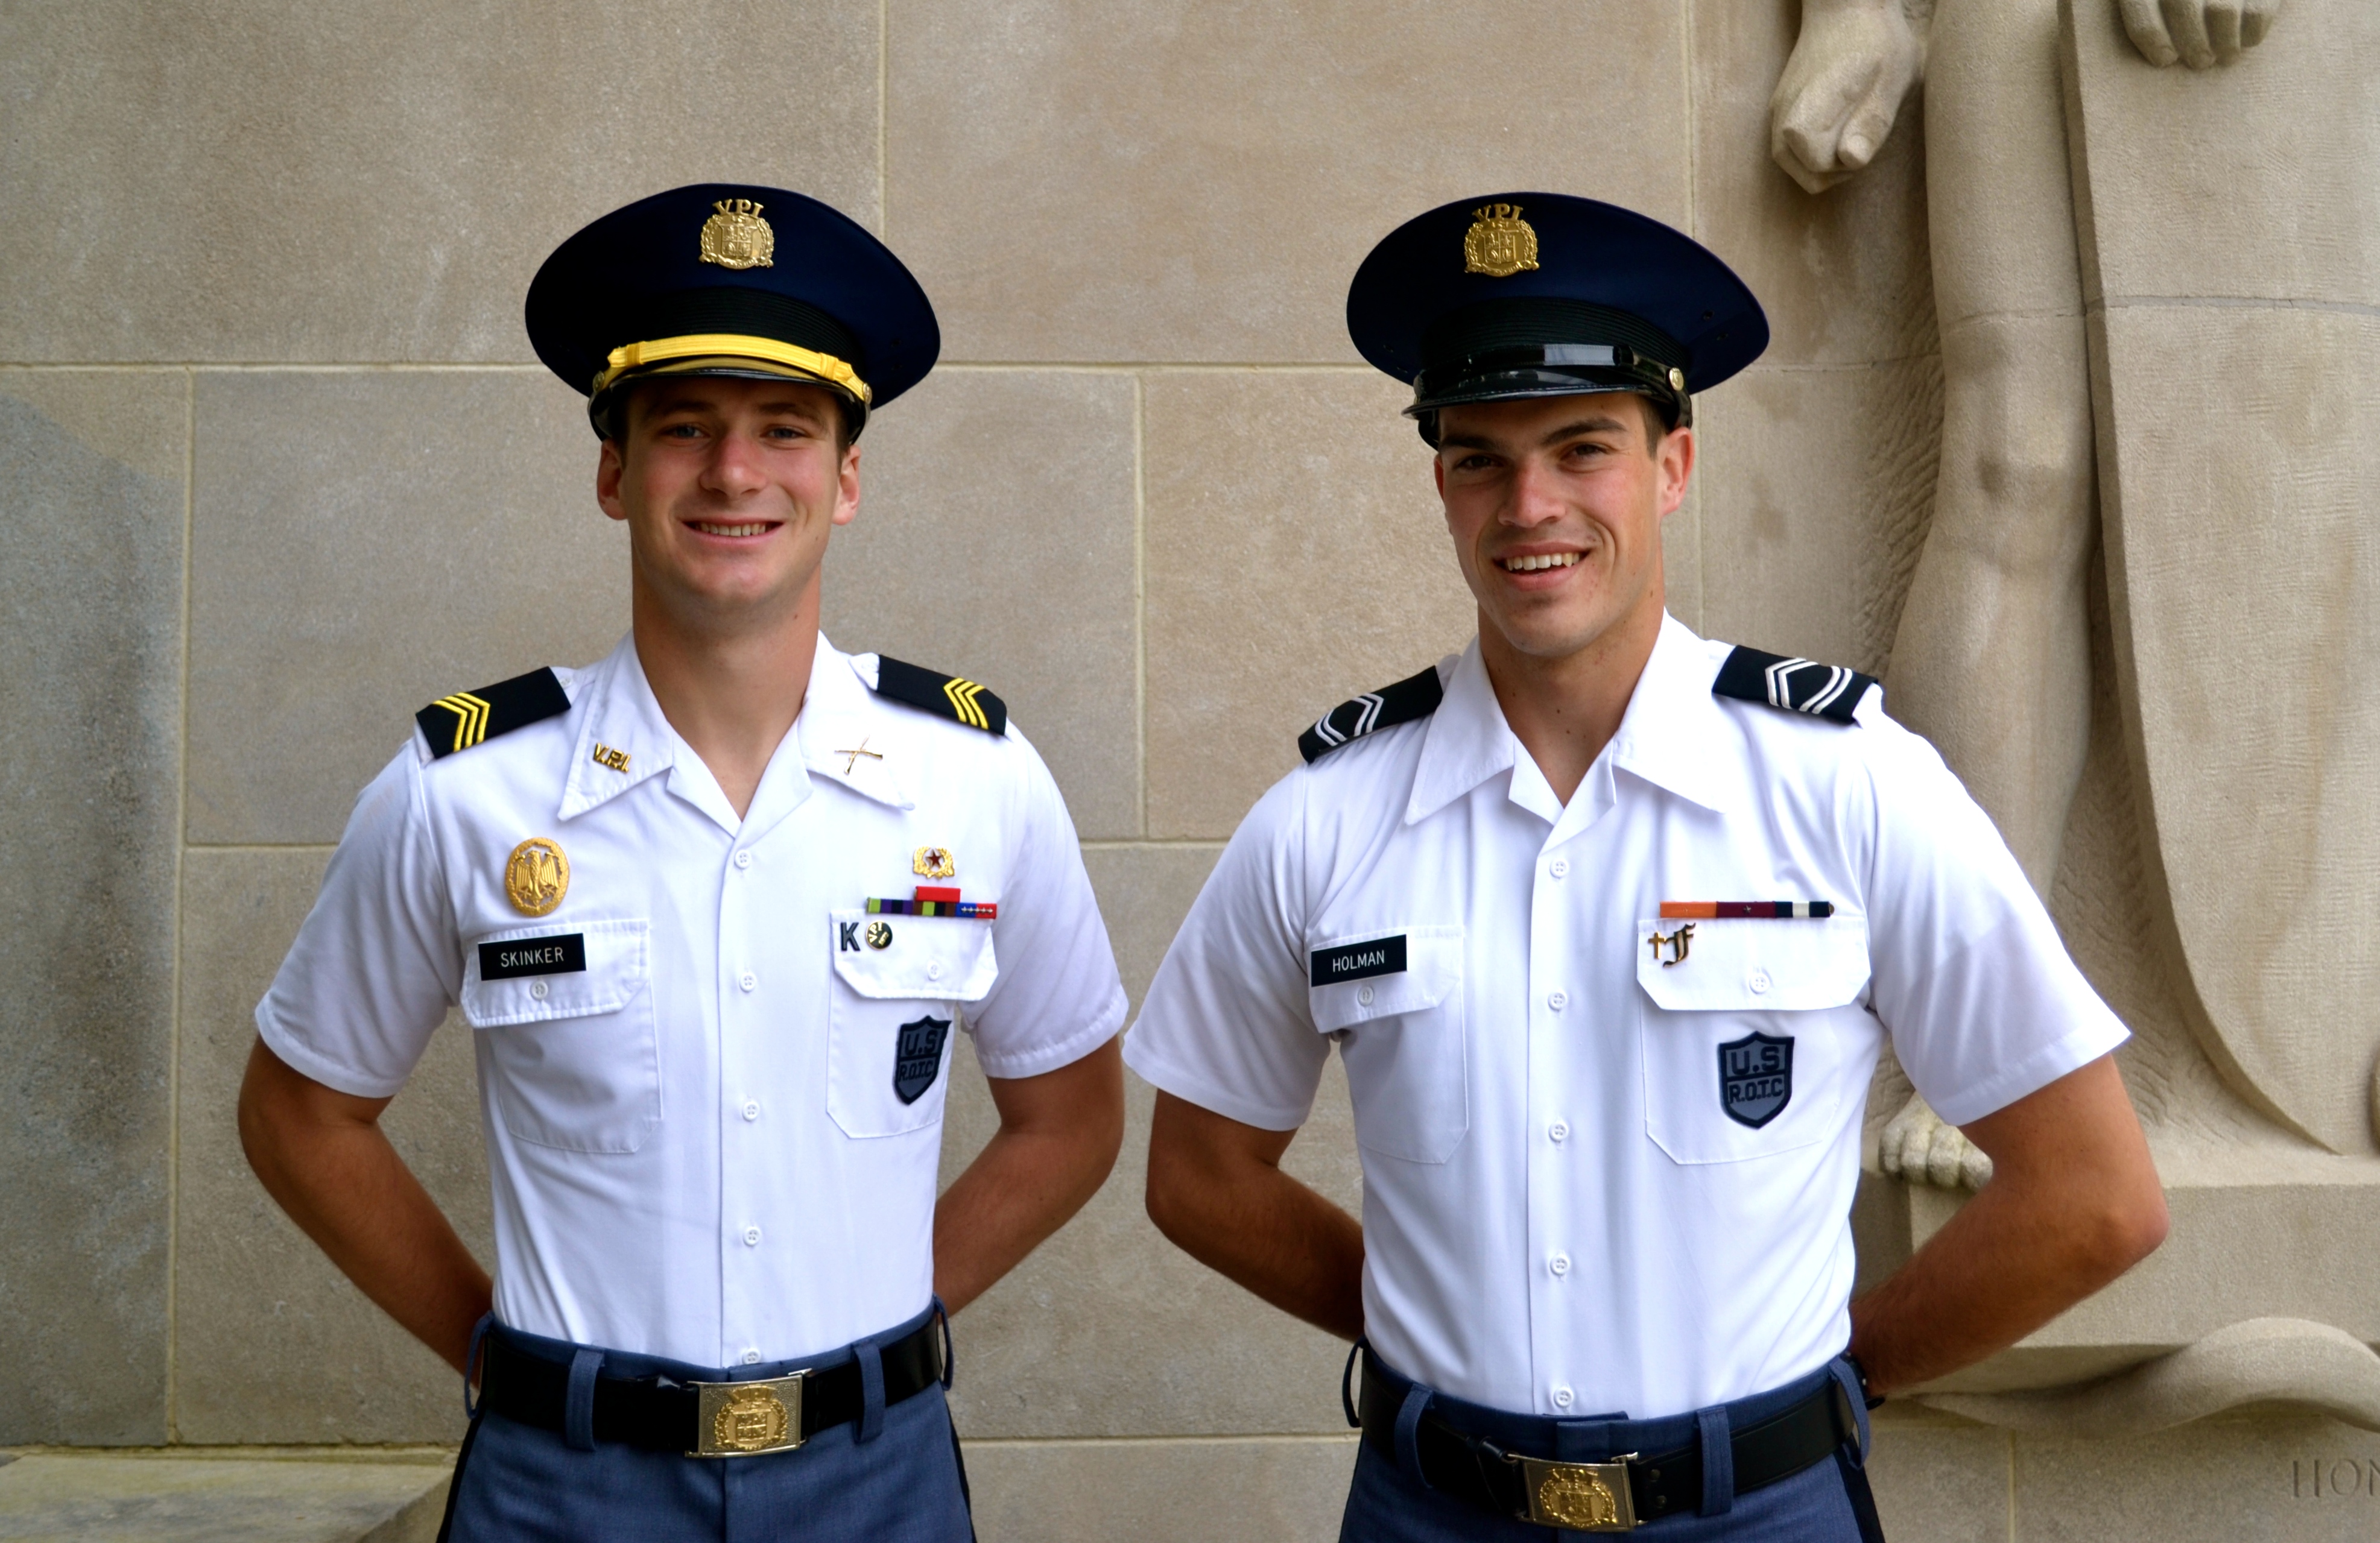 From left to right are Cadets Robert Skinker and Joseph Holman at the Pylons.